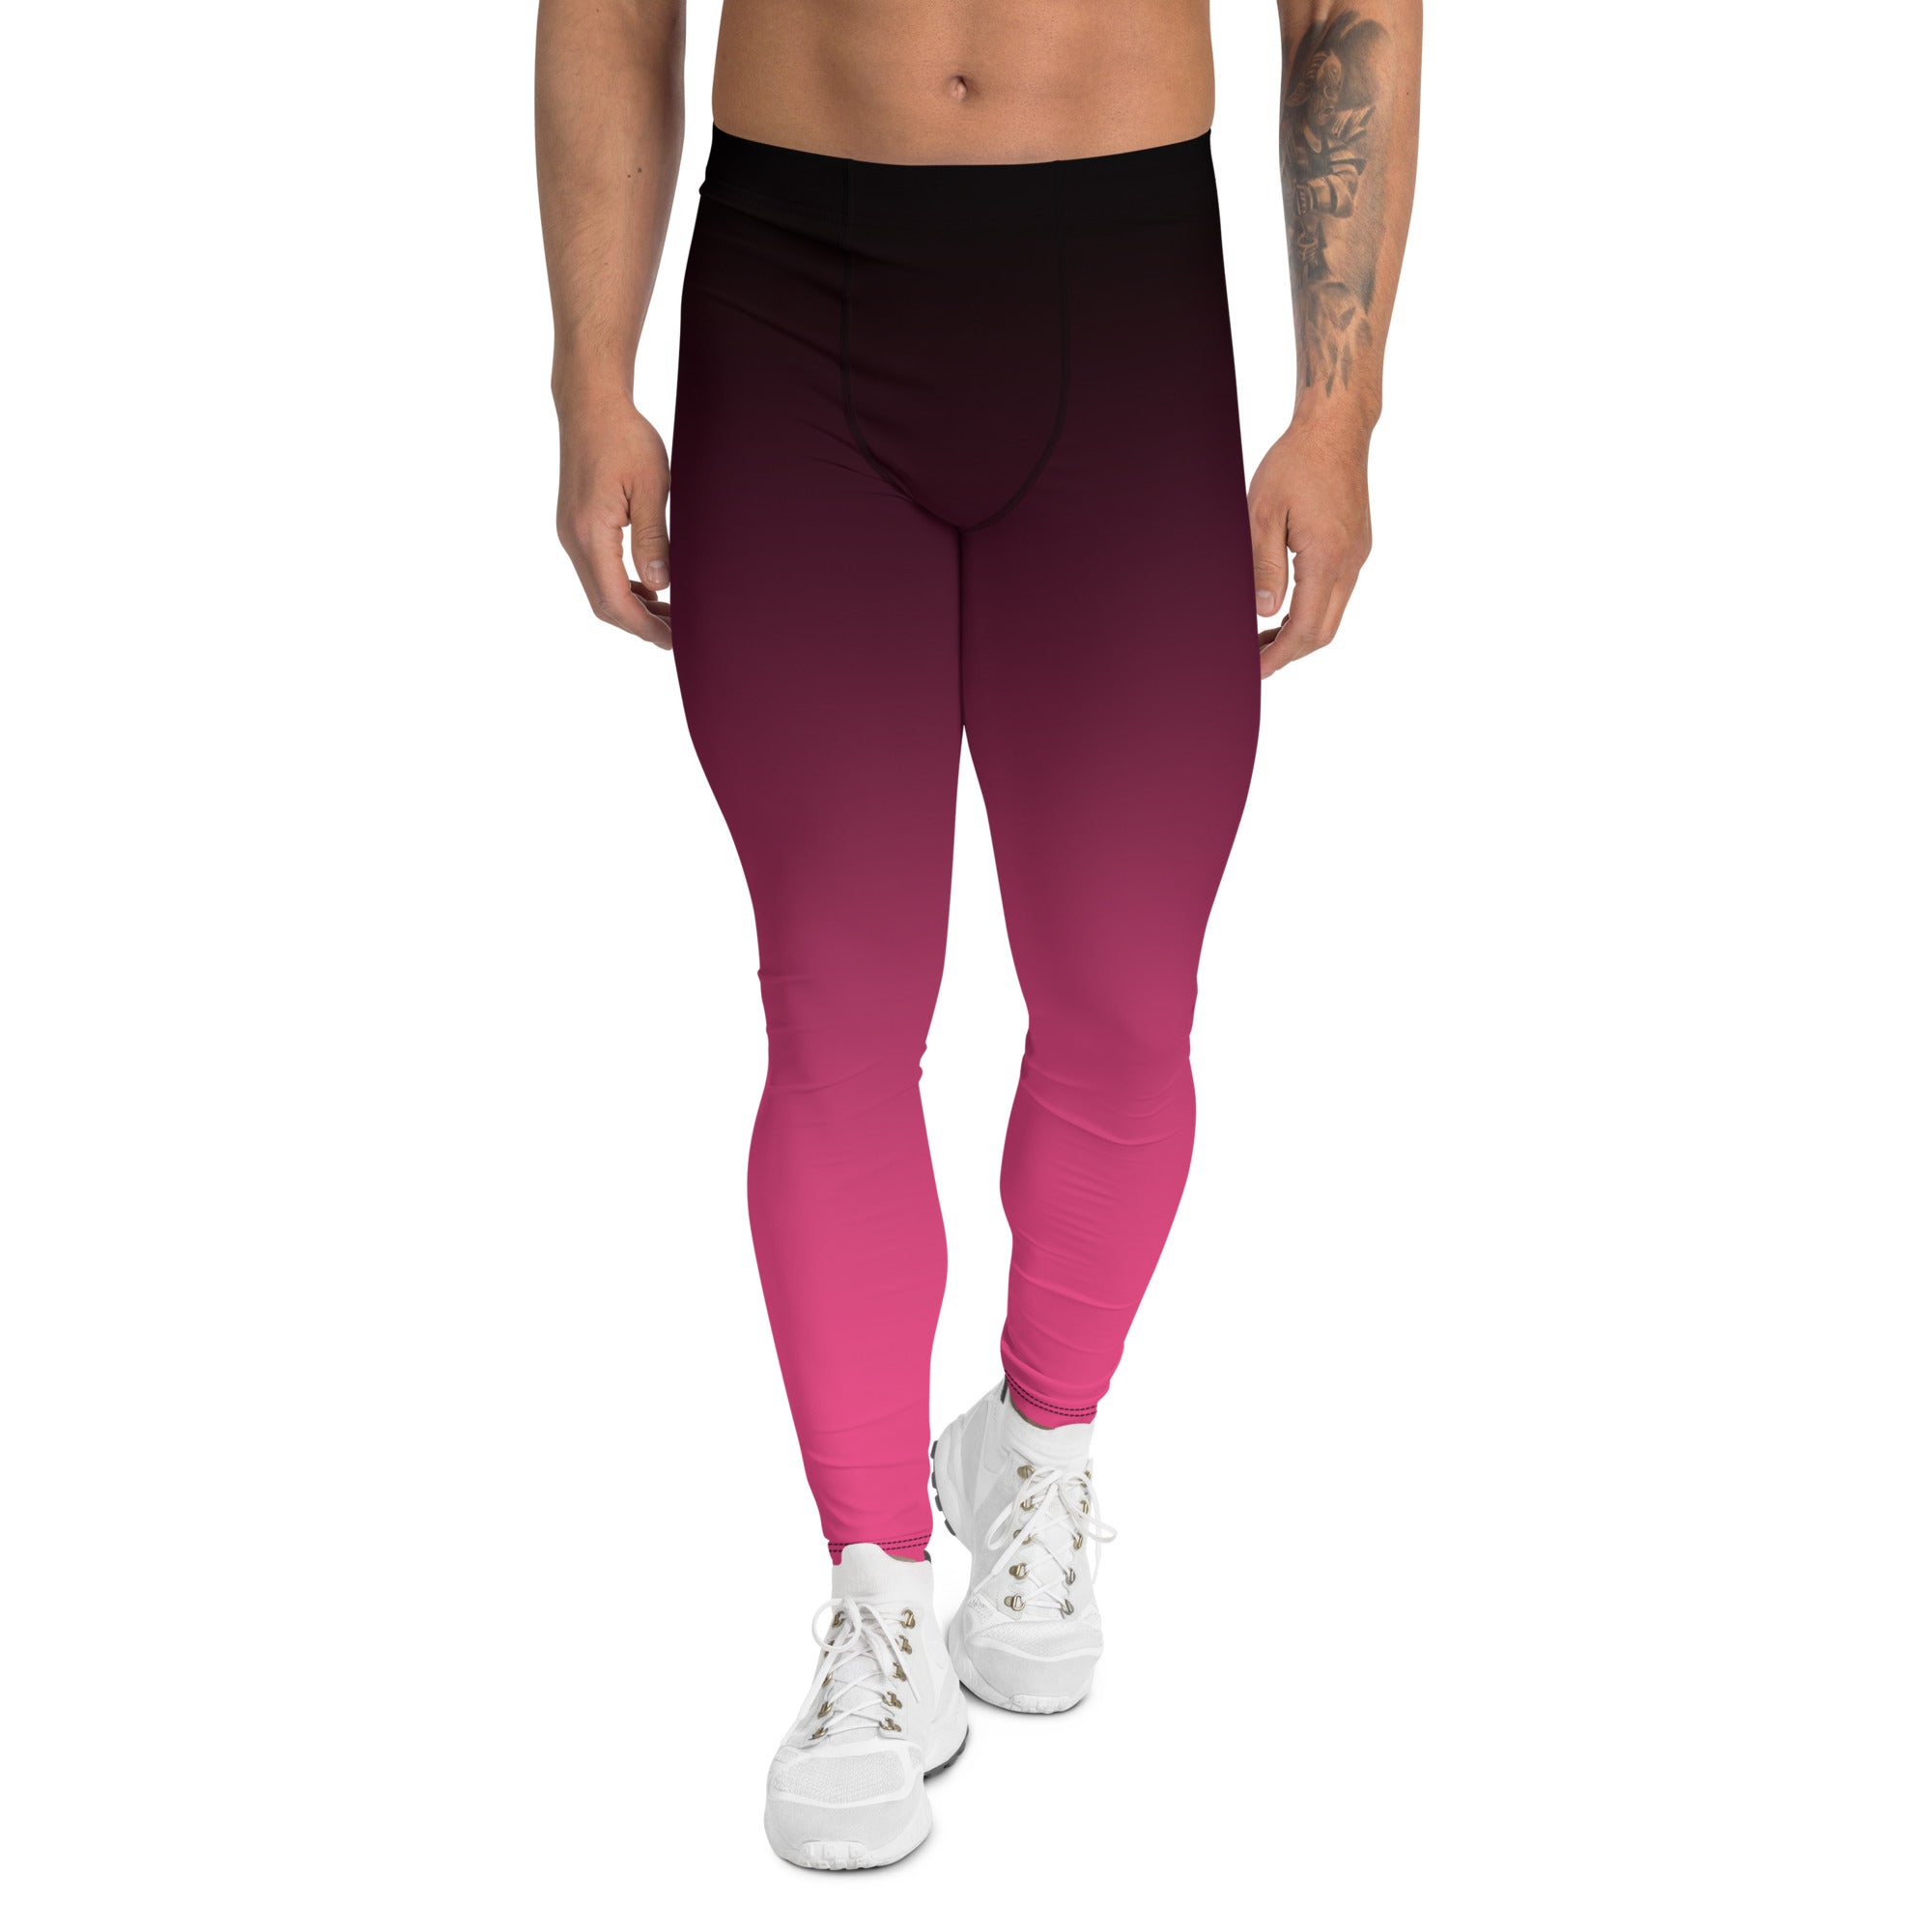 Black and Pink Ombre Men's Leggings